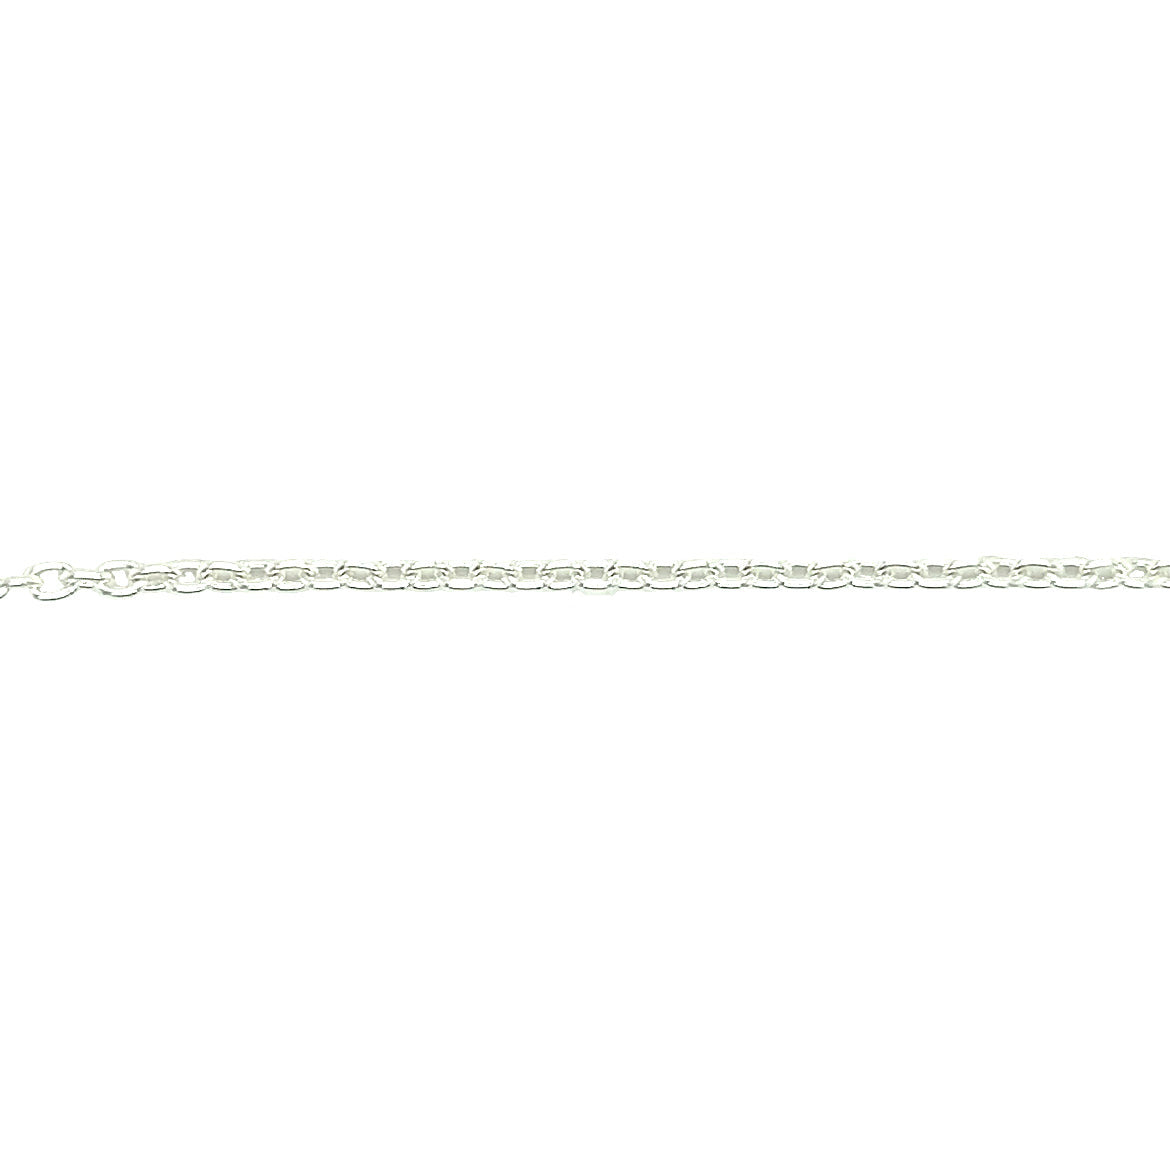 Cable Chain 2.25mm with 24in of Length in Sterling Silver Chain View